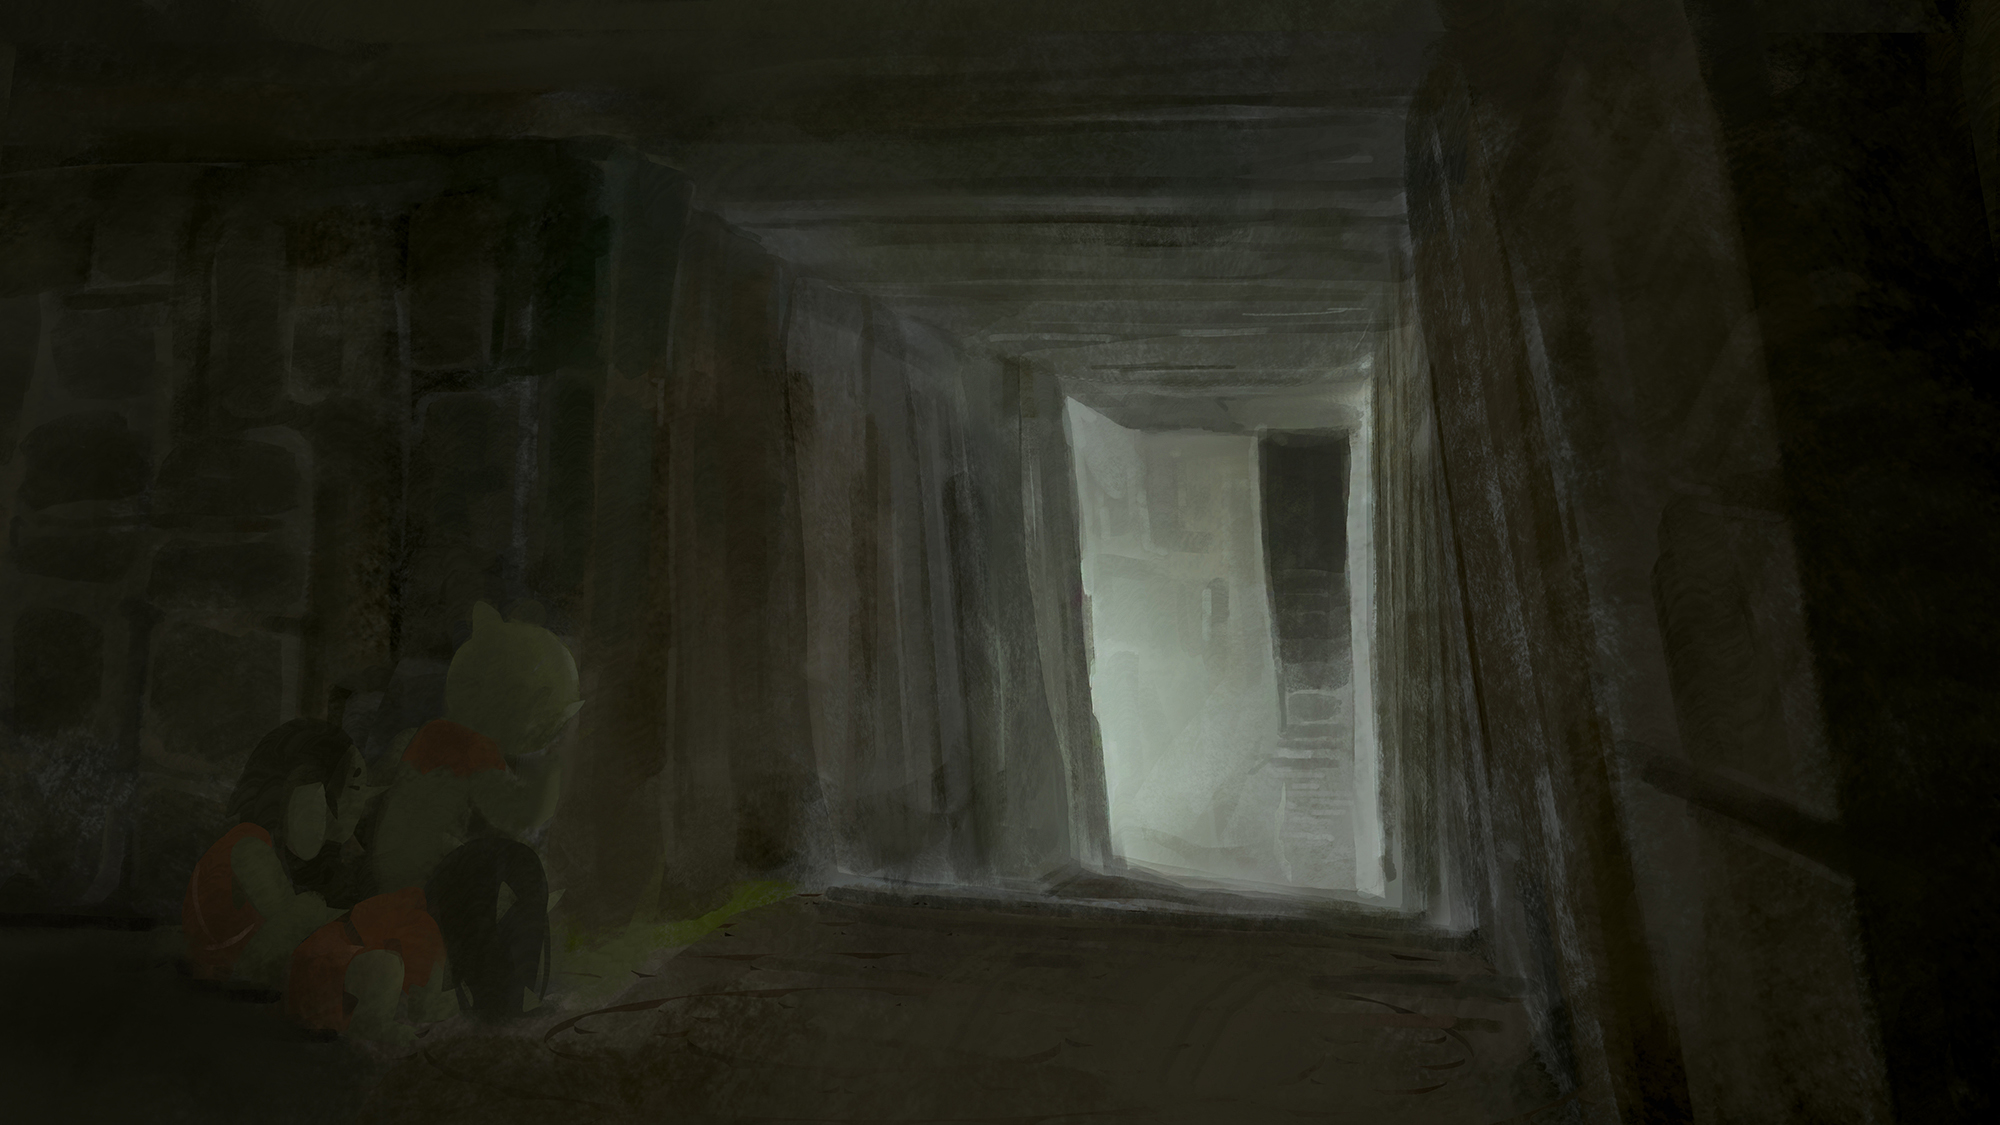 three goblins peering around a corner of a dungeon hallway that leads to a brightly lit room